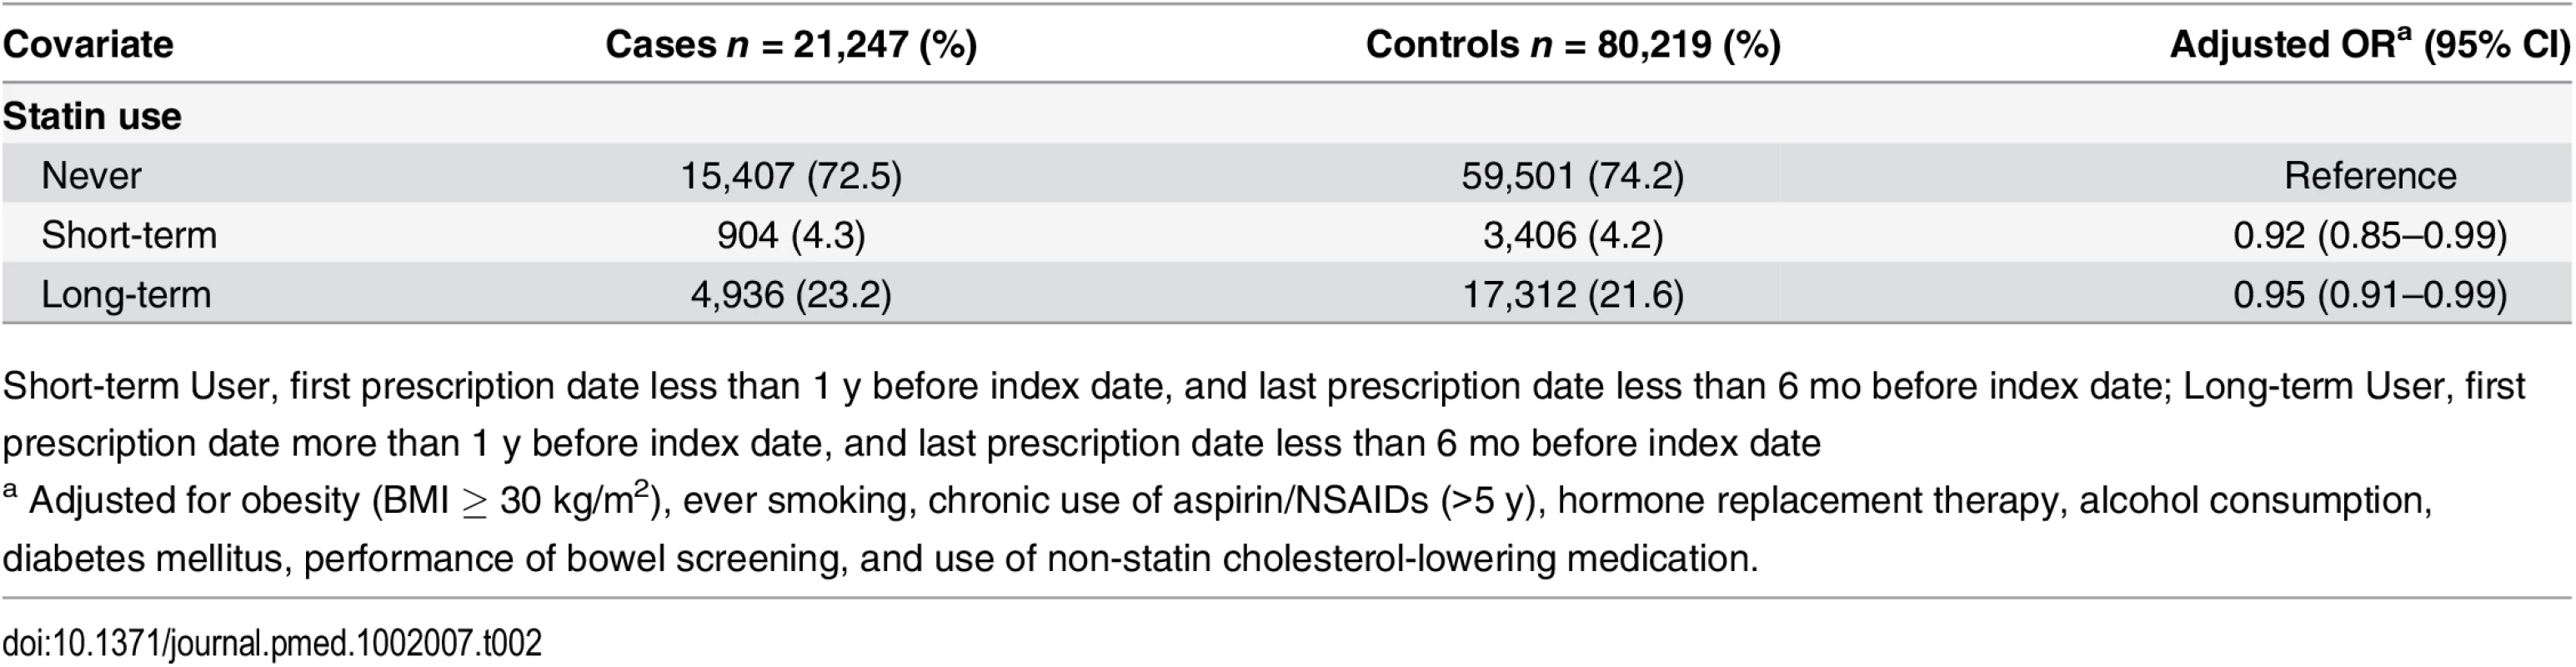 ORs for colorectal cancer risk in statin users relative to nonusers.